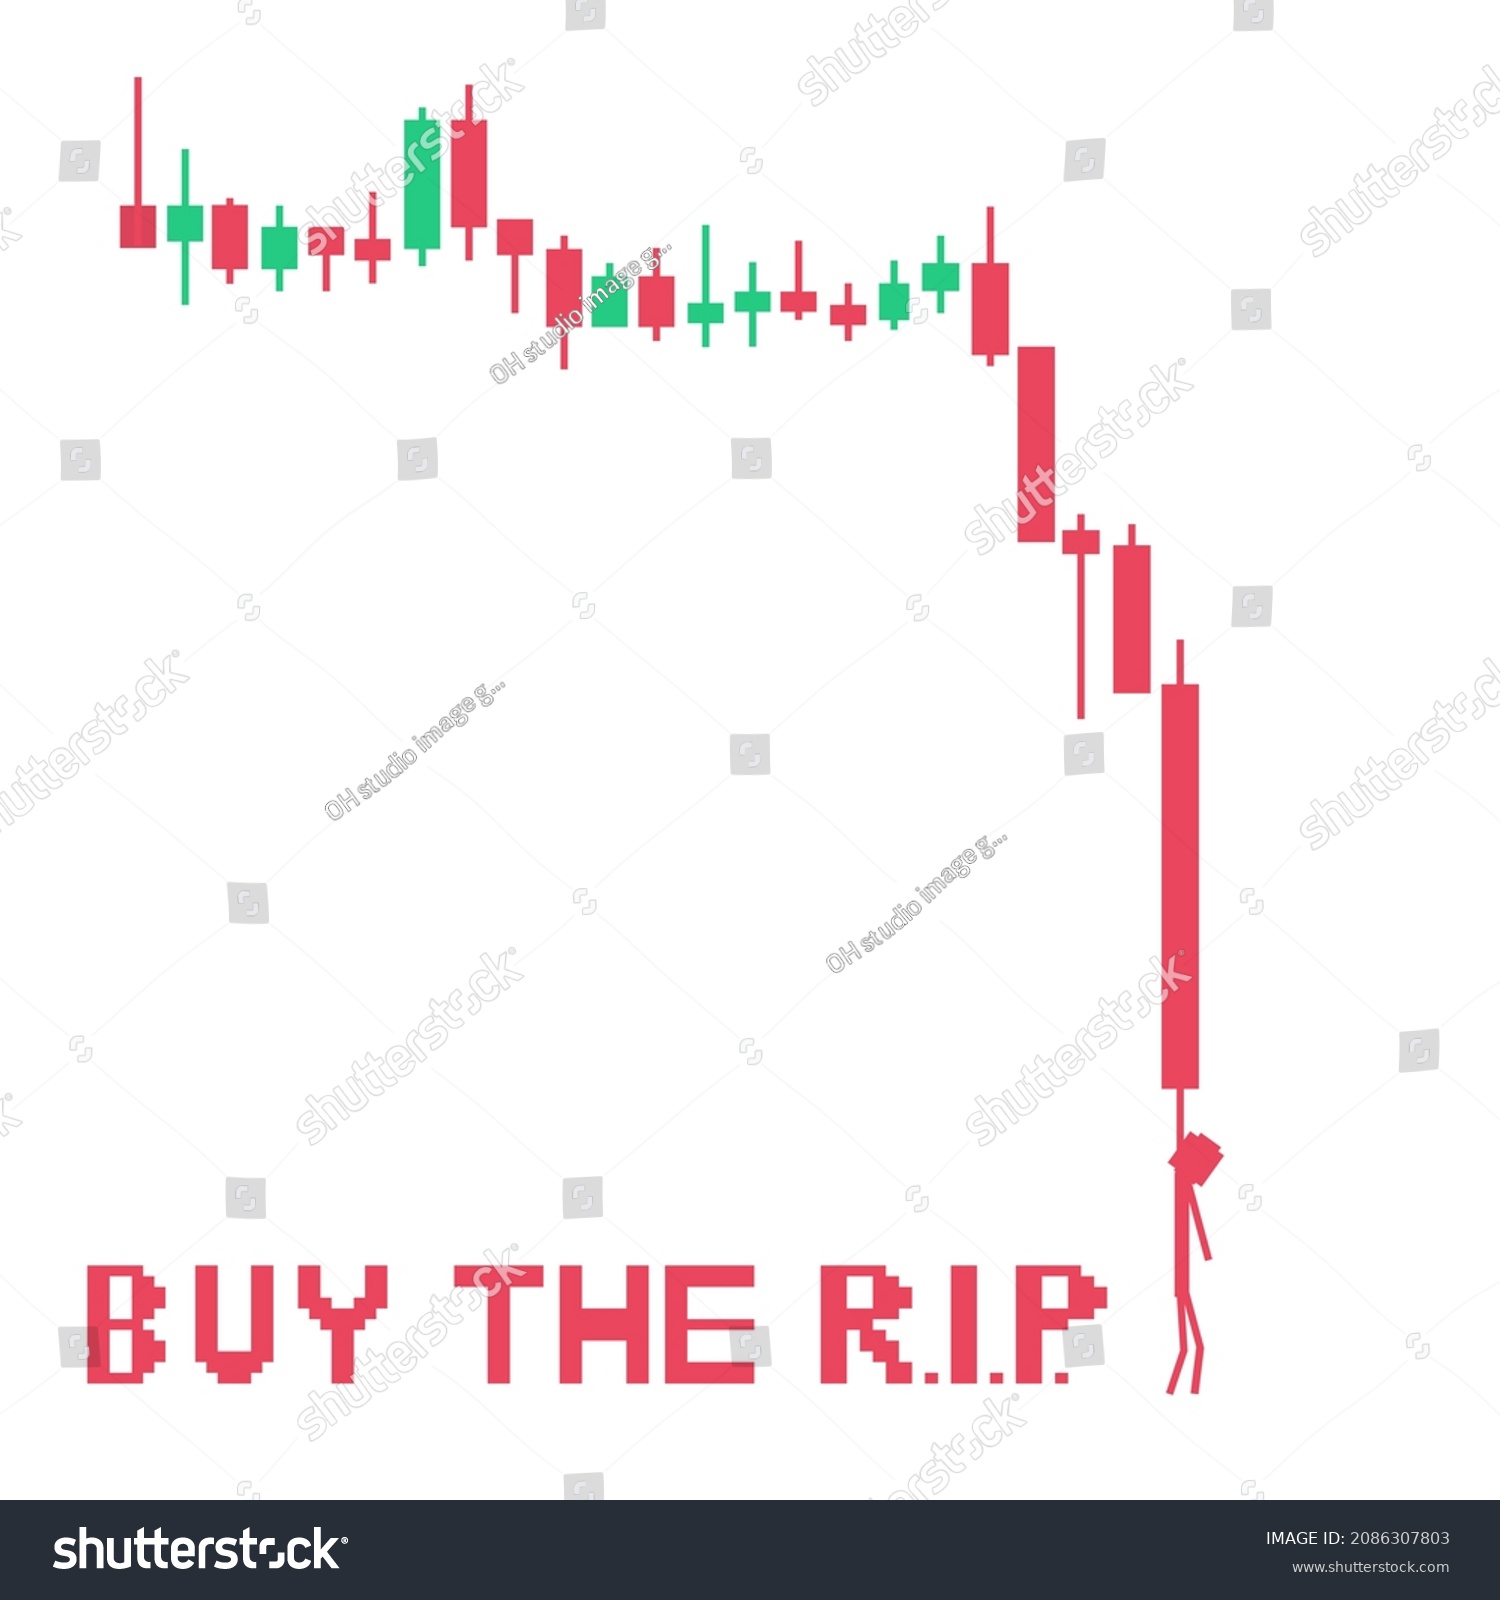 SVG of crypto currency graph , stock  trading chart downtrend until you die  cartoon style.  svg